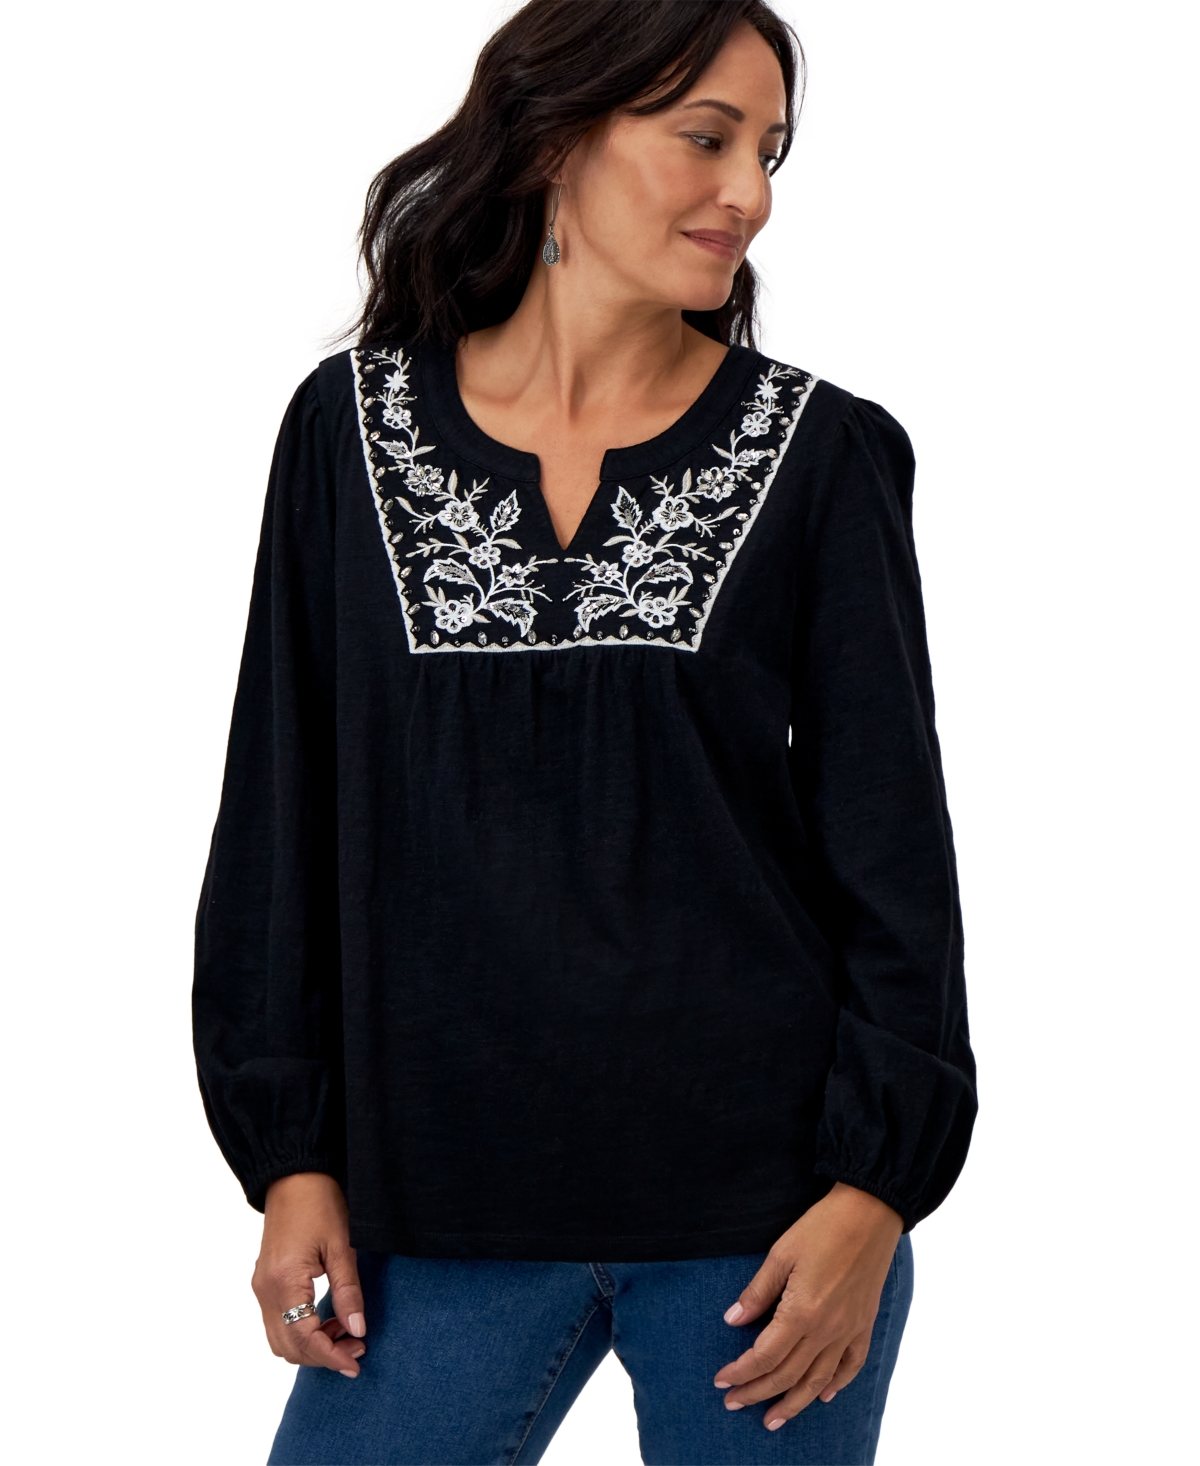 Petite Embroidered Shimmer-Knit Cotton Top, Created for Macy's - Dance Deep Black